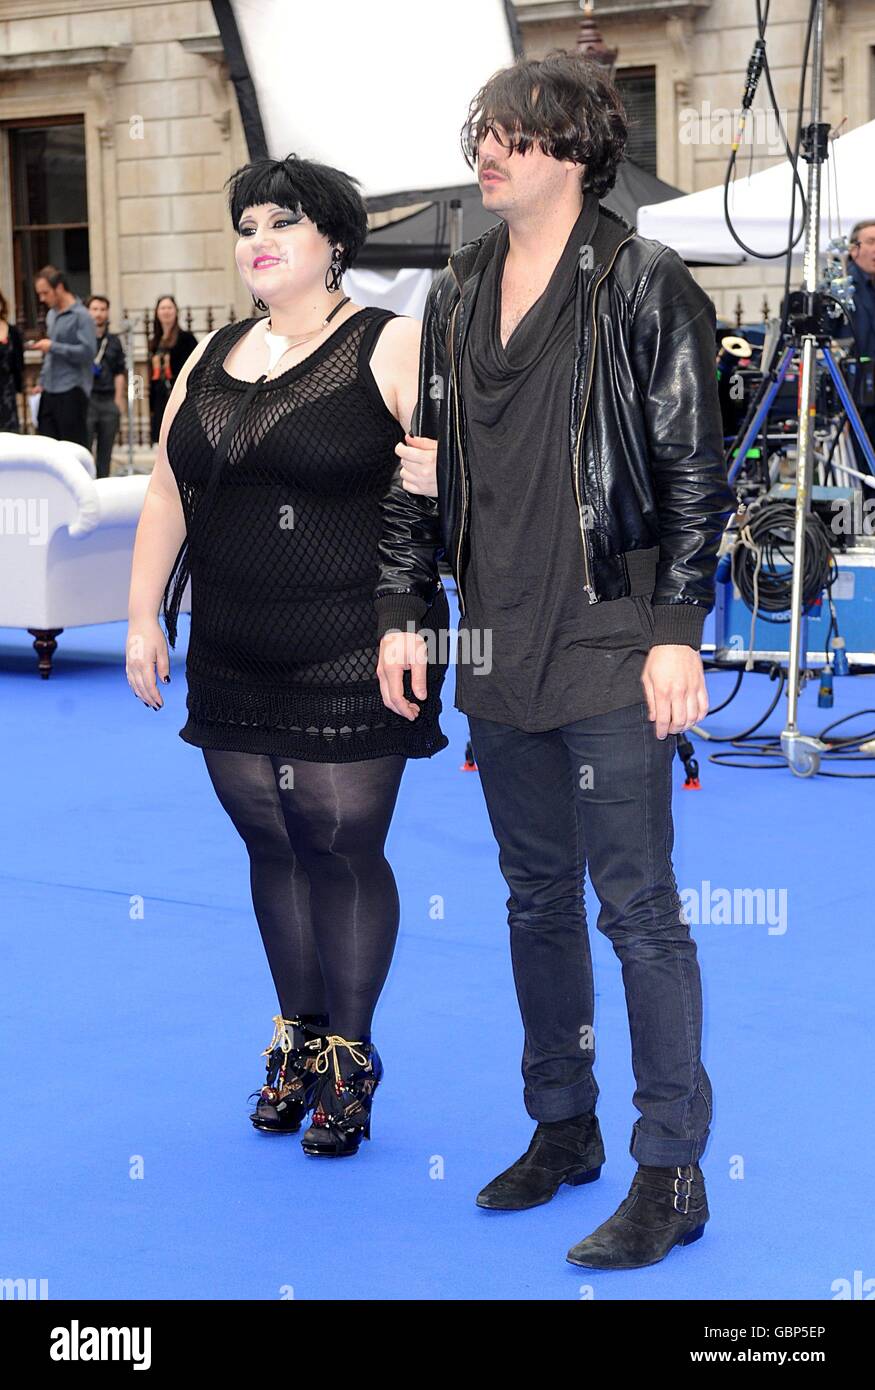 Beth Ditto and Brace Payne of The Gossip arrive at the Royal Academy of Arts Summer Exhibition Preview Party 2009 at Royal Academy of Arts, Burlington House in Piccadilly, central London. Stock Photo